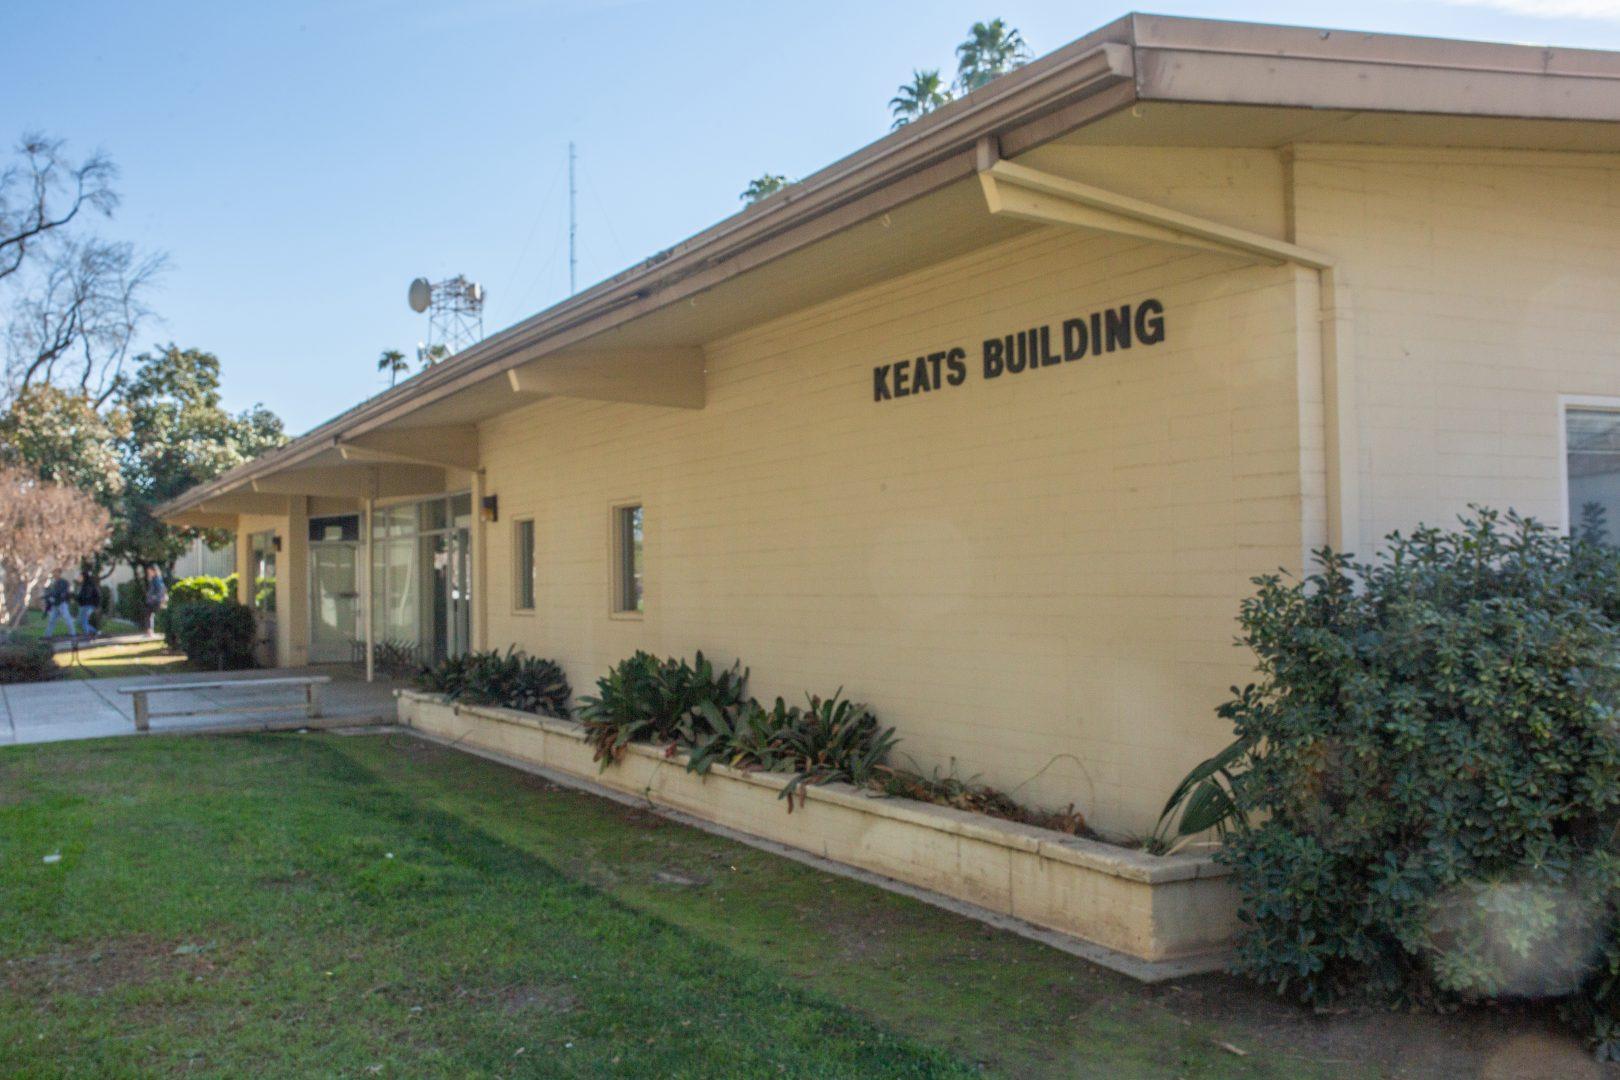 Keats building has storied past on campus